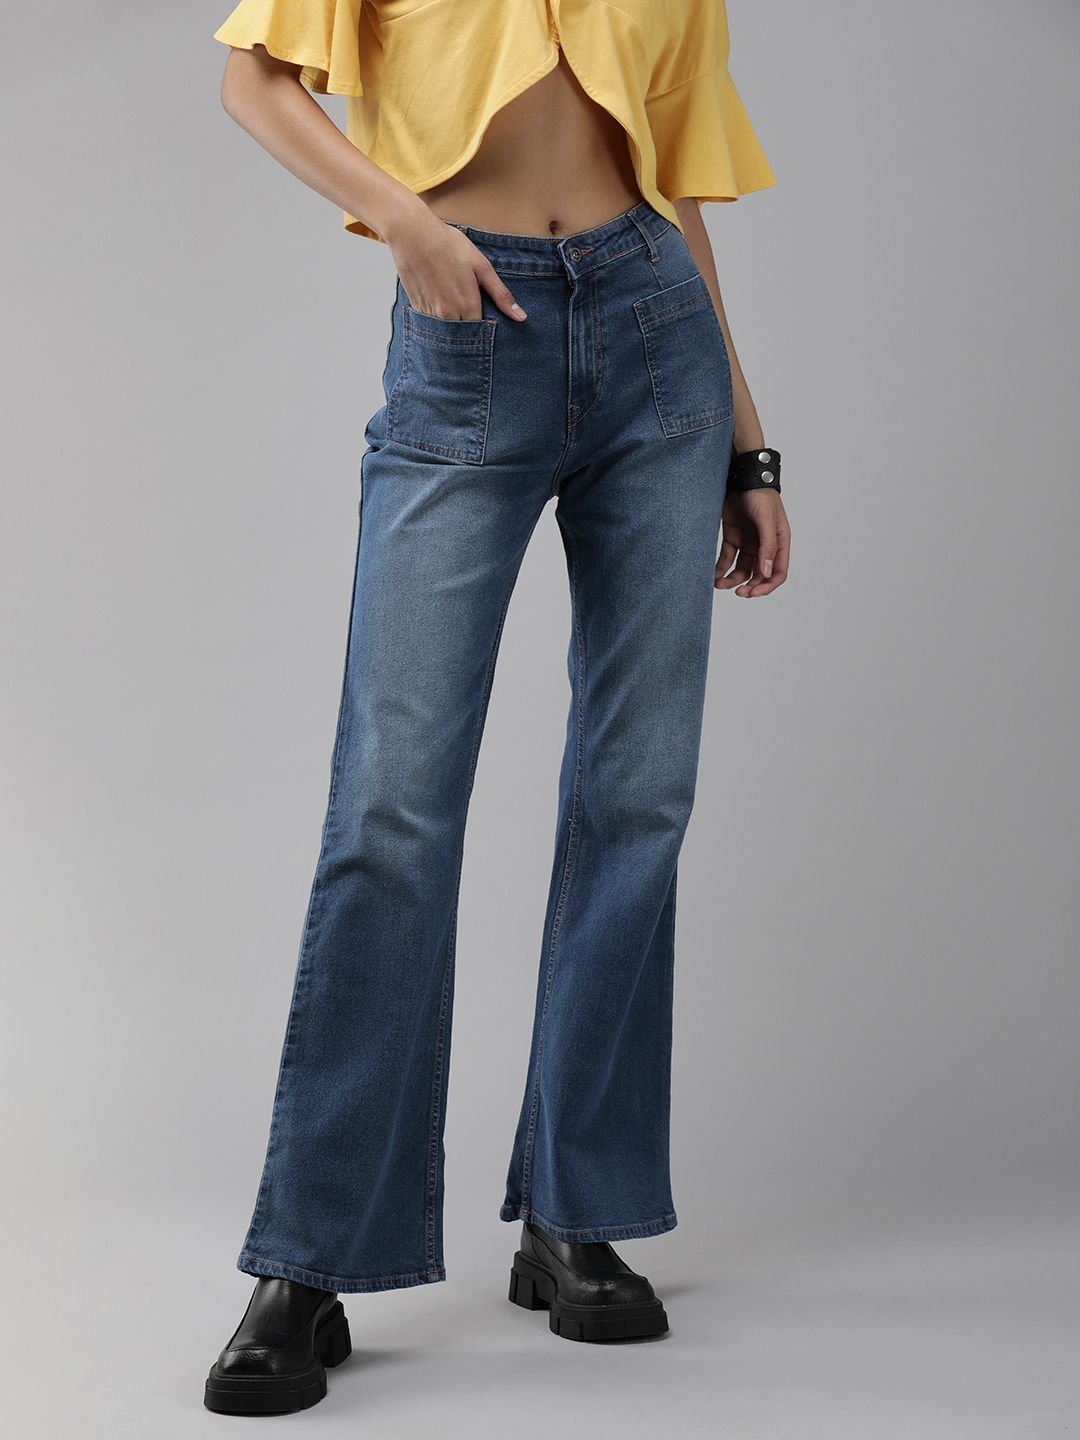 The Roadster Lifestyle Co Women Blue Flared High-Rise Light Fade Stretchable Jeans Price in India